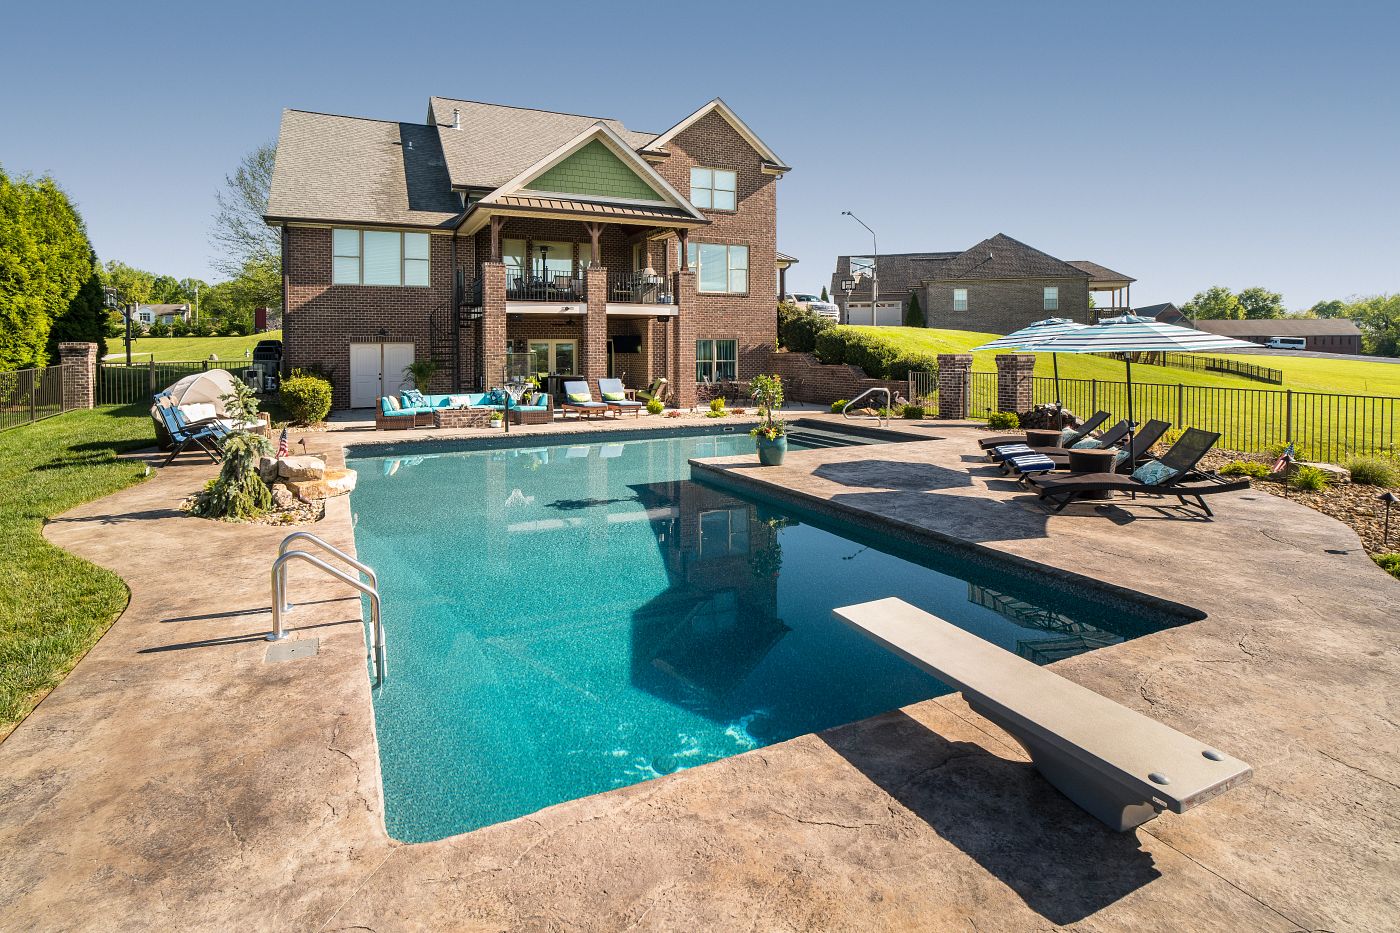 large vinly liner pool in a spacious southern backyard